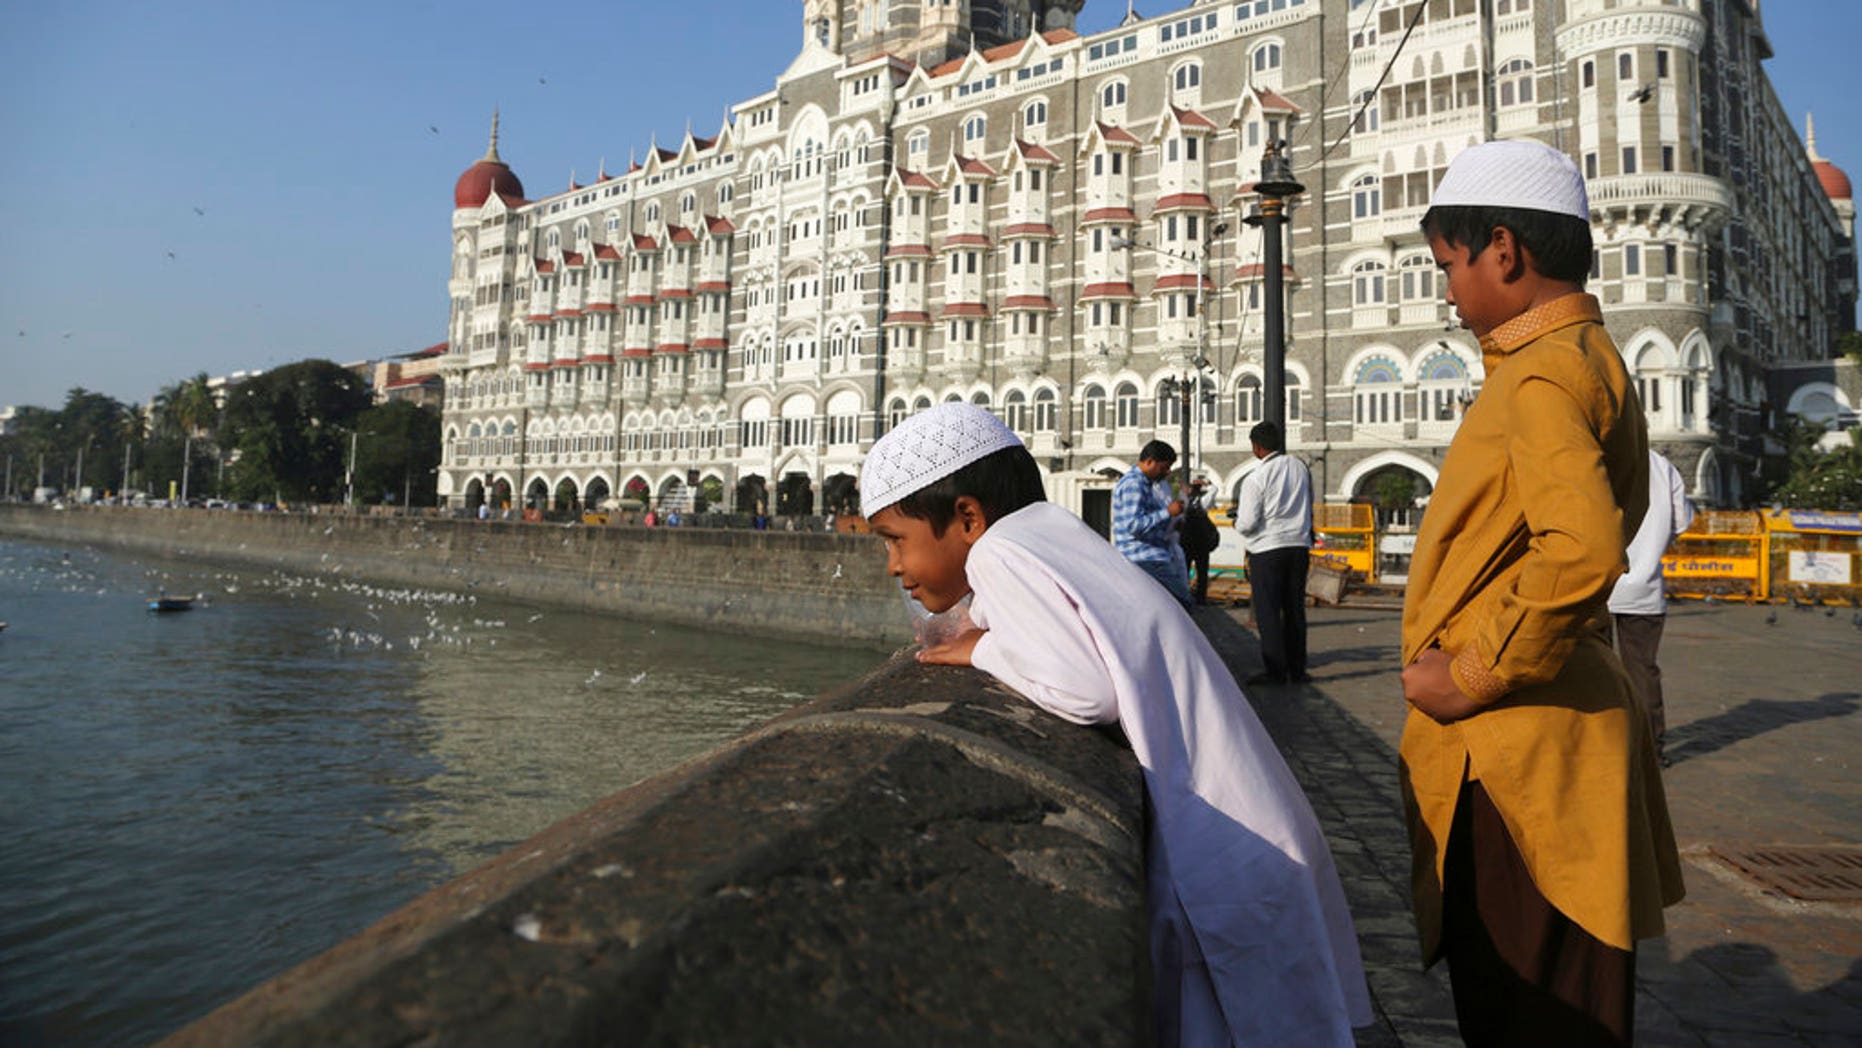 In this photo of November 17, 2018, two Muslim boys stand in front of the iconic Taj Mahal Palace, the epicenter of the 2008 terrorist attacks that killed 166 people in Mumbai, India.